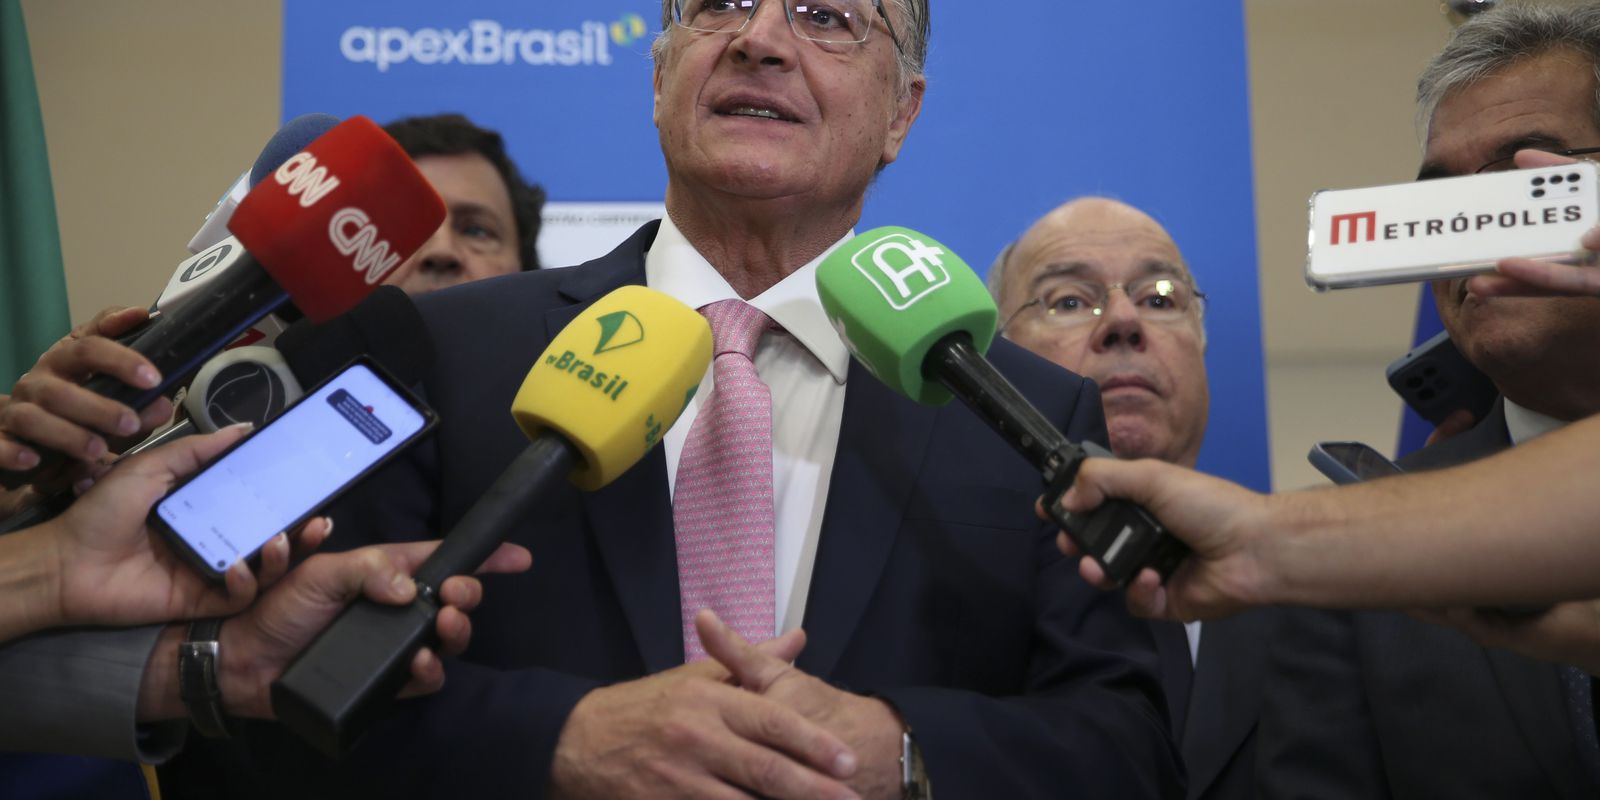 Alckmin says democracy is strengthened after anti-democratic acts